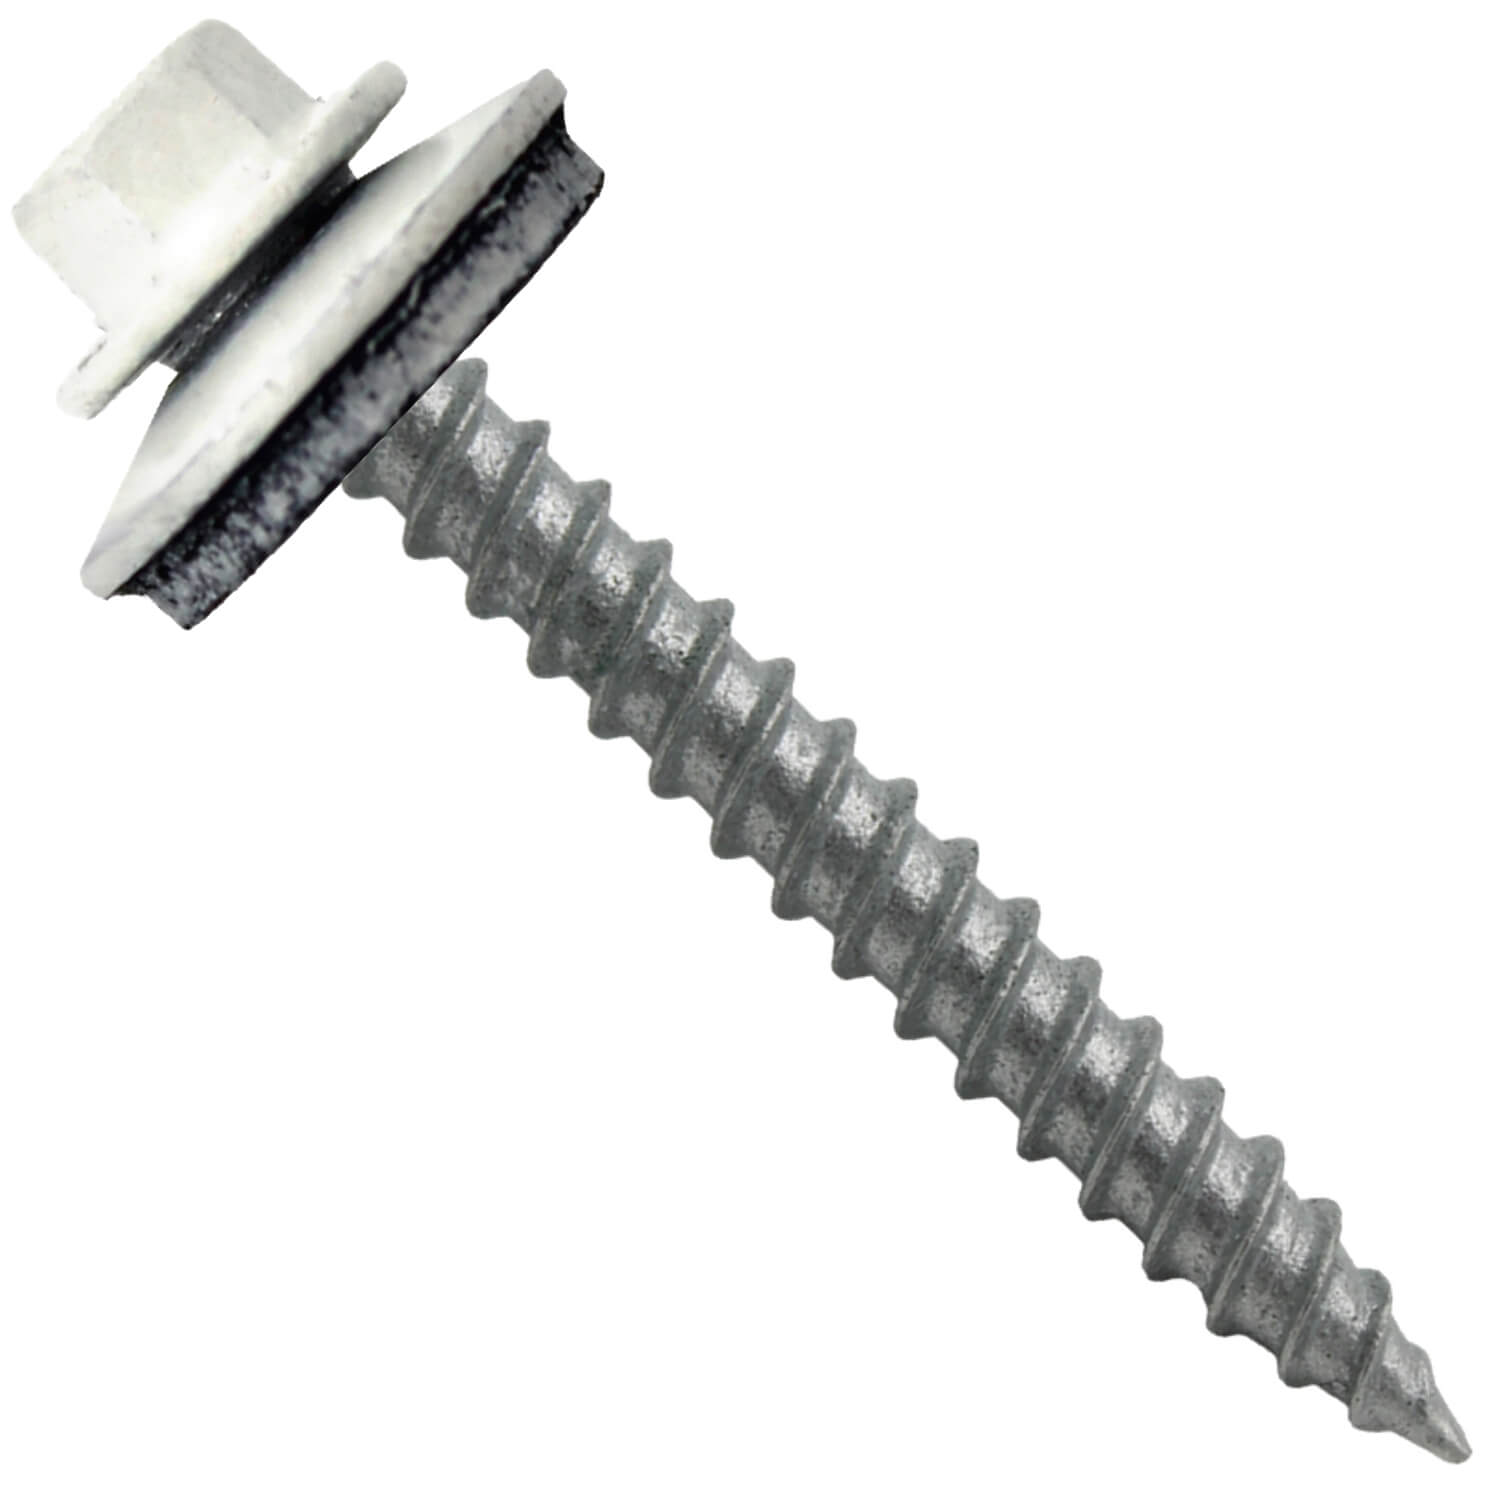 50 50mm 2" CORRUGATED ROOFING SCREWS & GREY STRAP CAPS FOR SHEET ROOFING * 